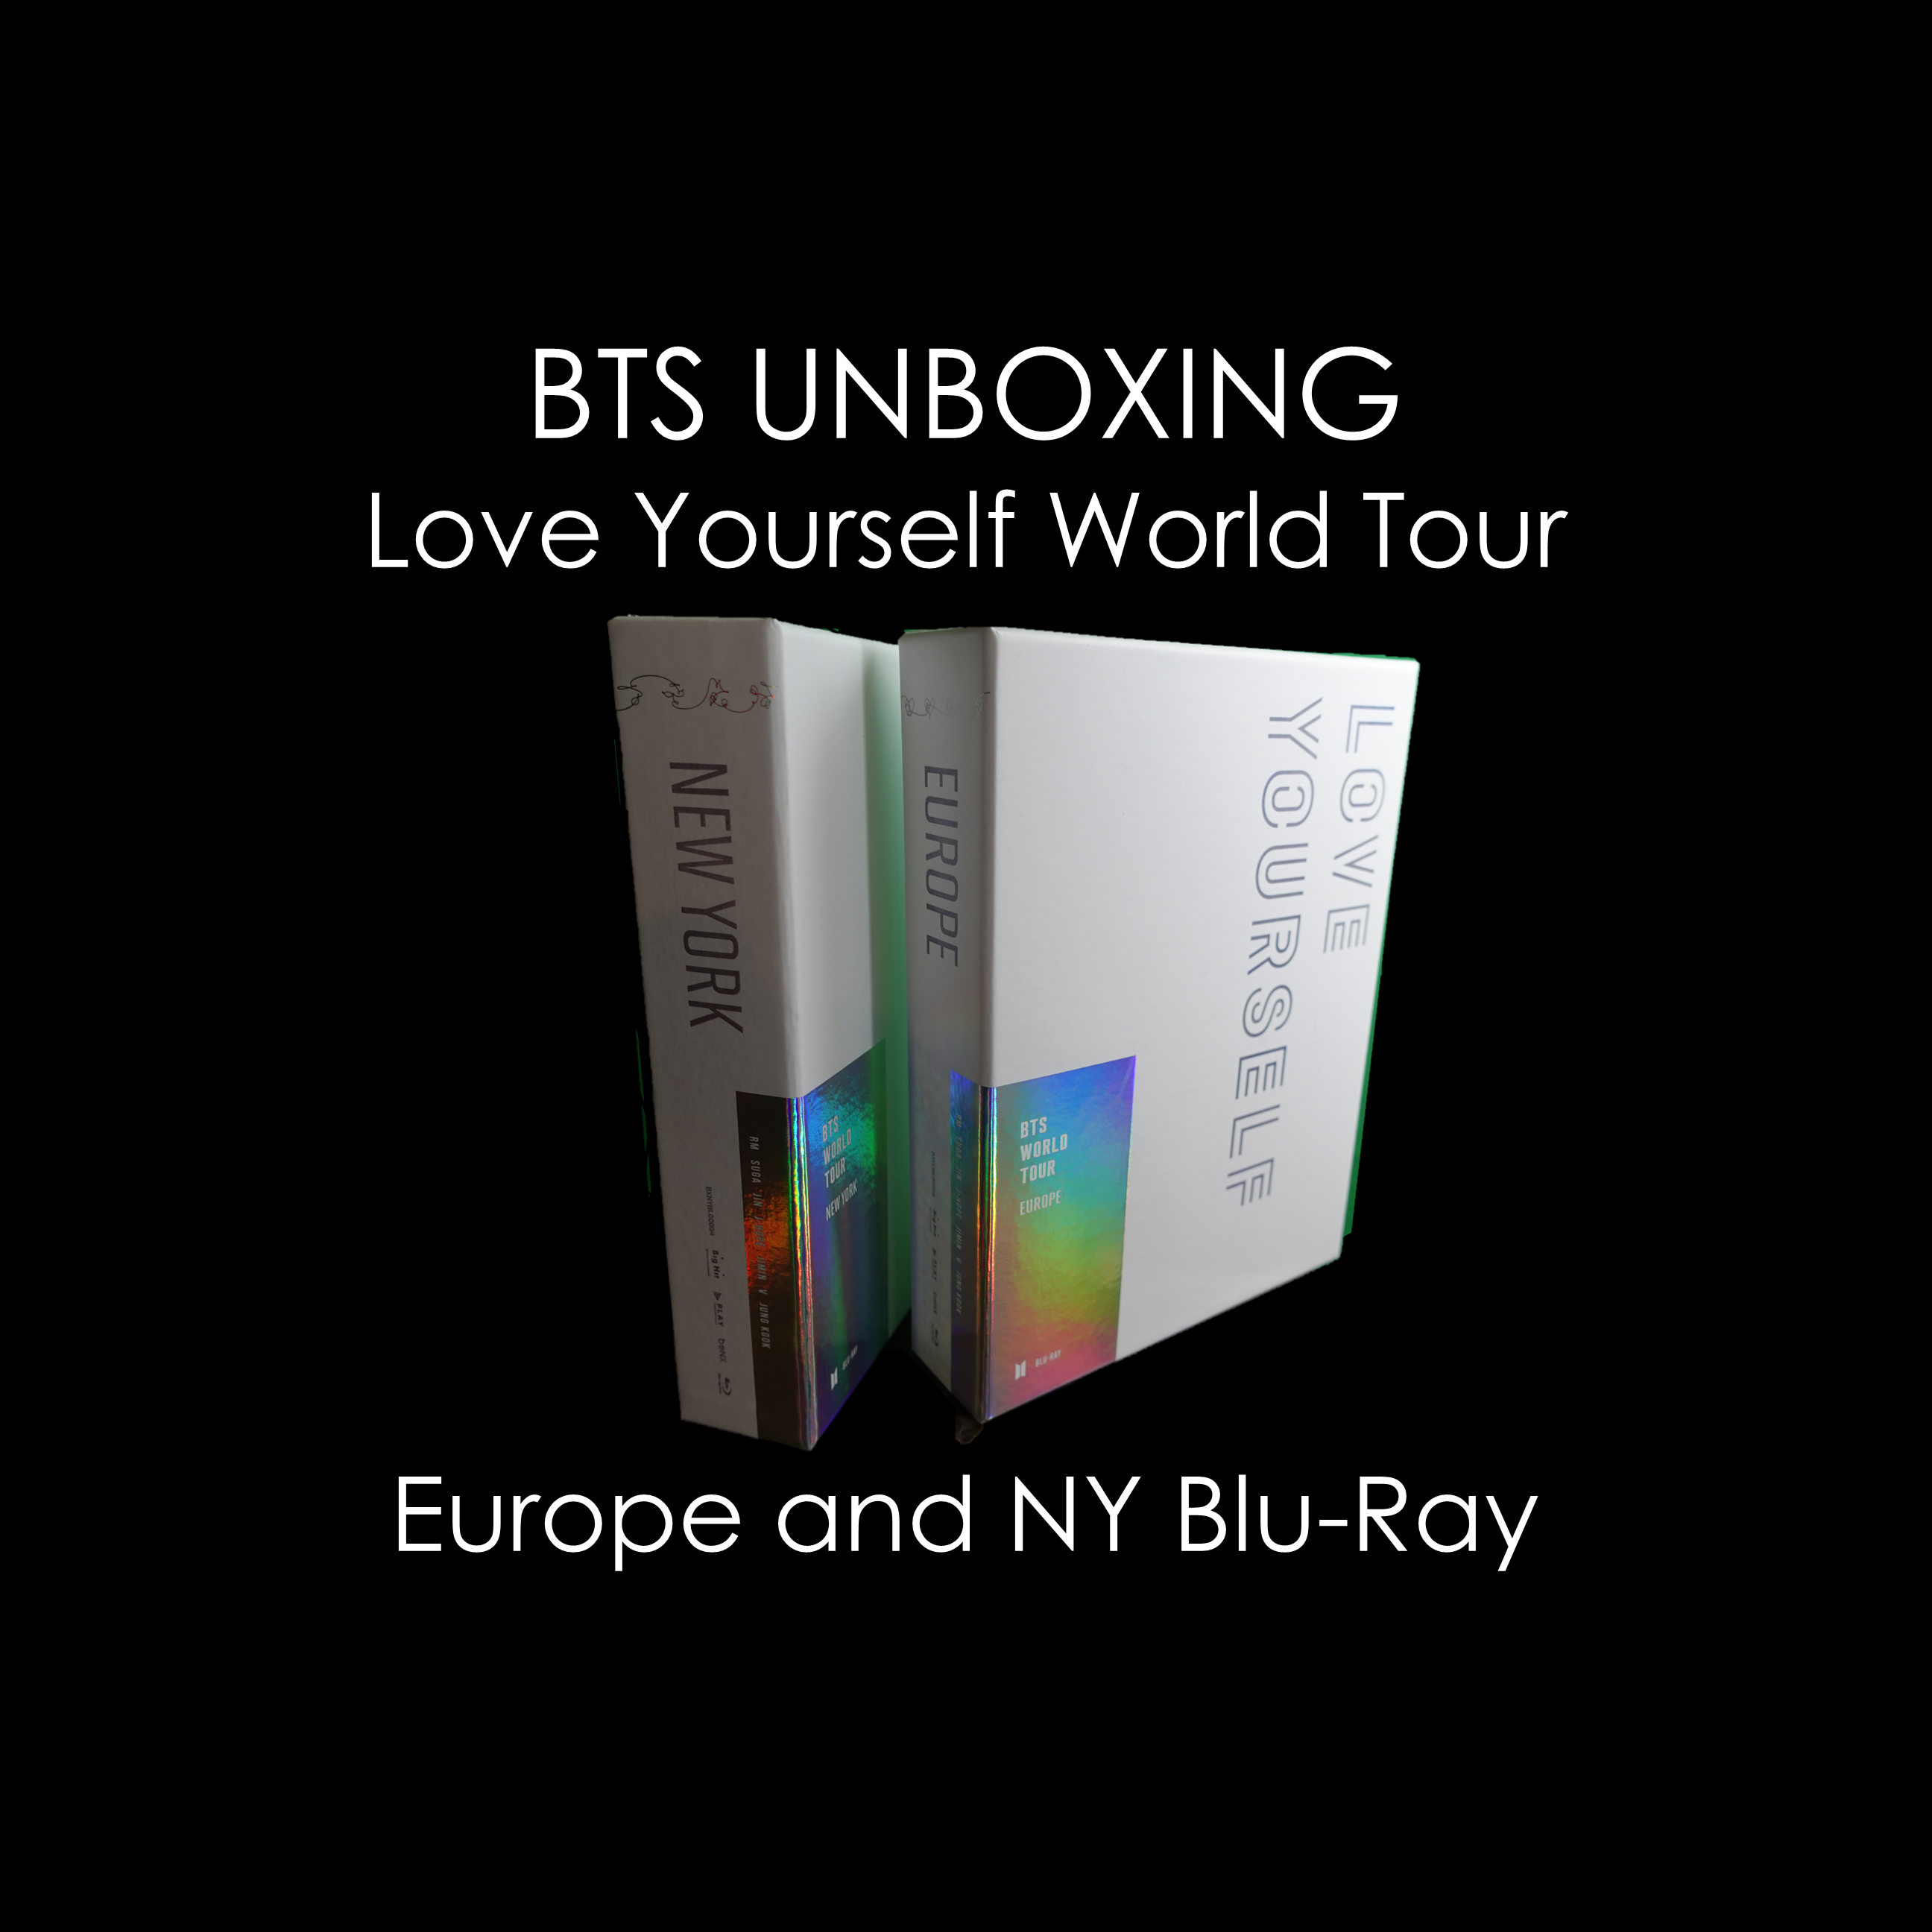 BTS Unboxing – Europe and NY Love Yourself World Tour BLU-RAY and 